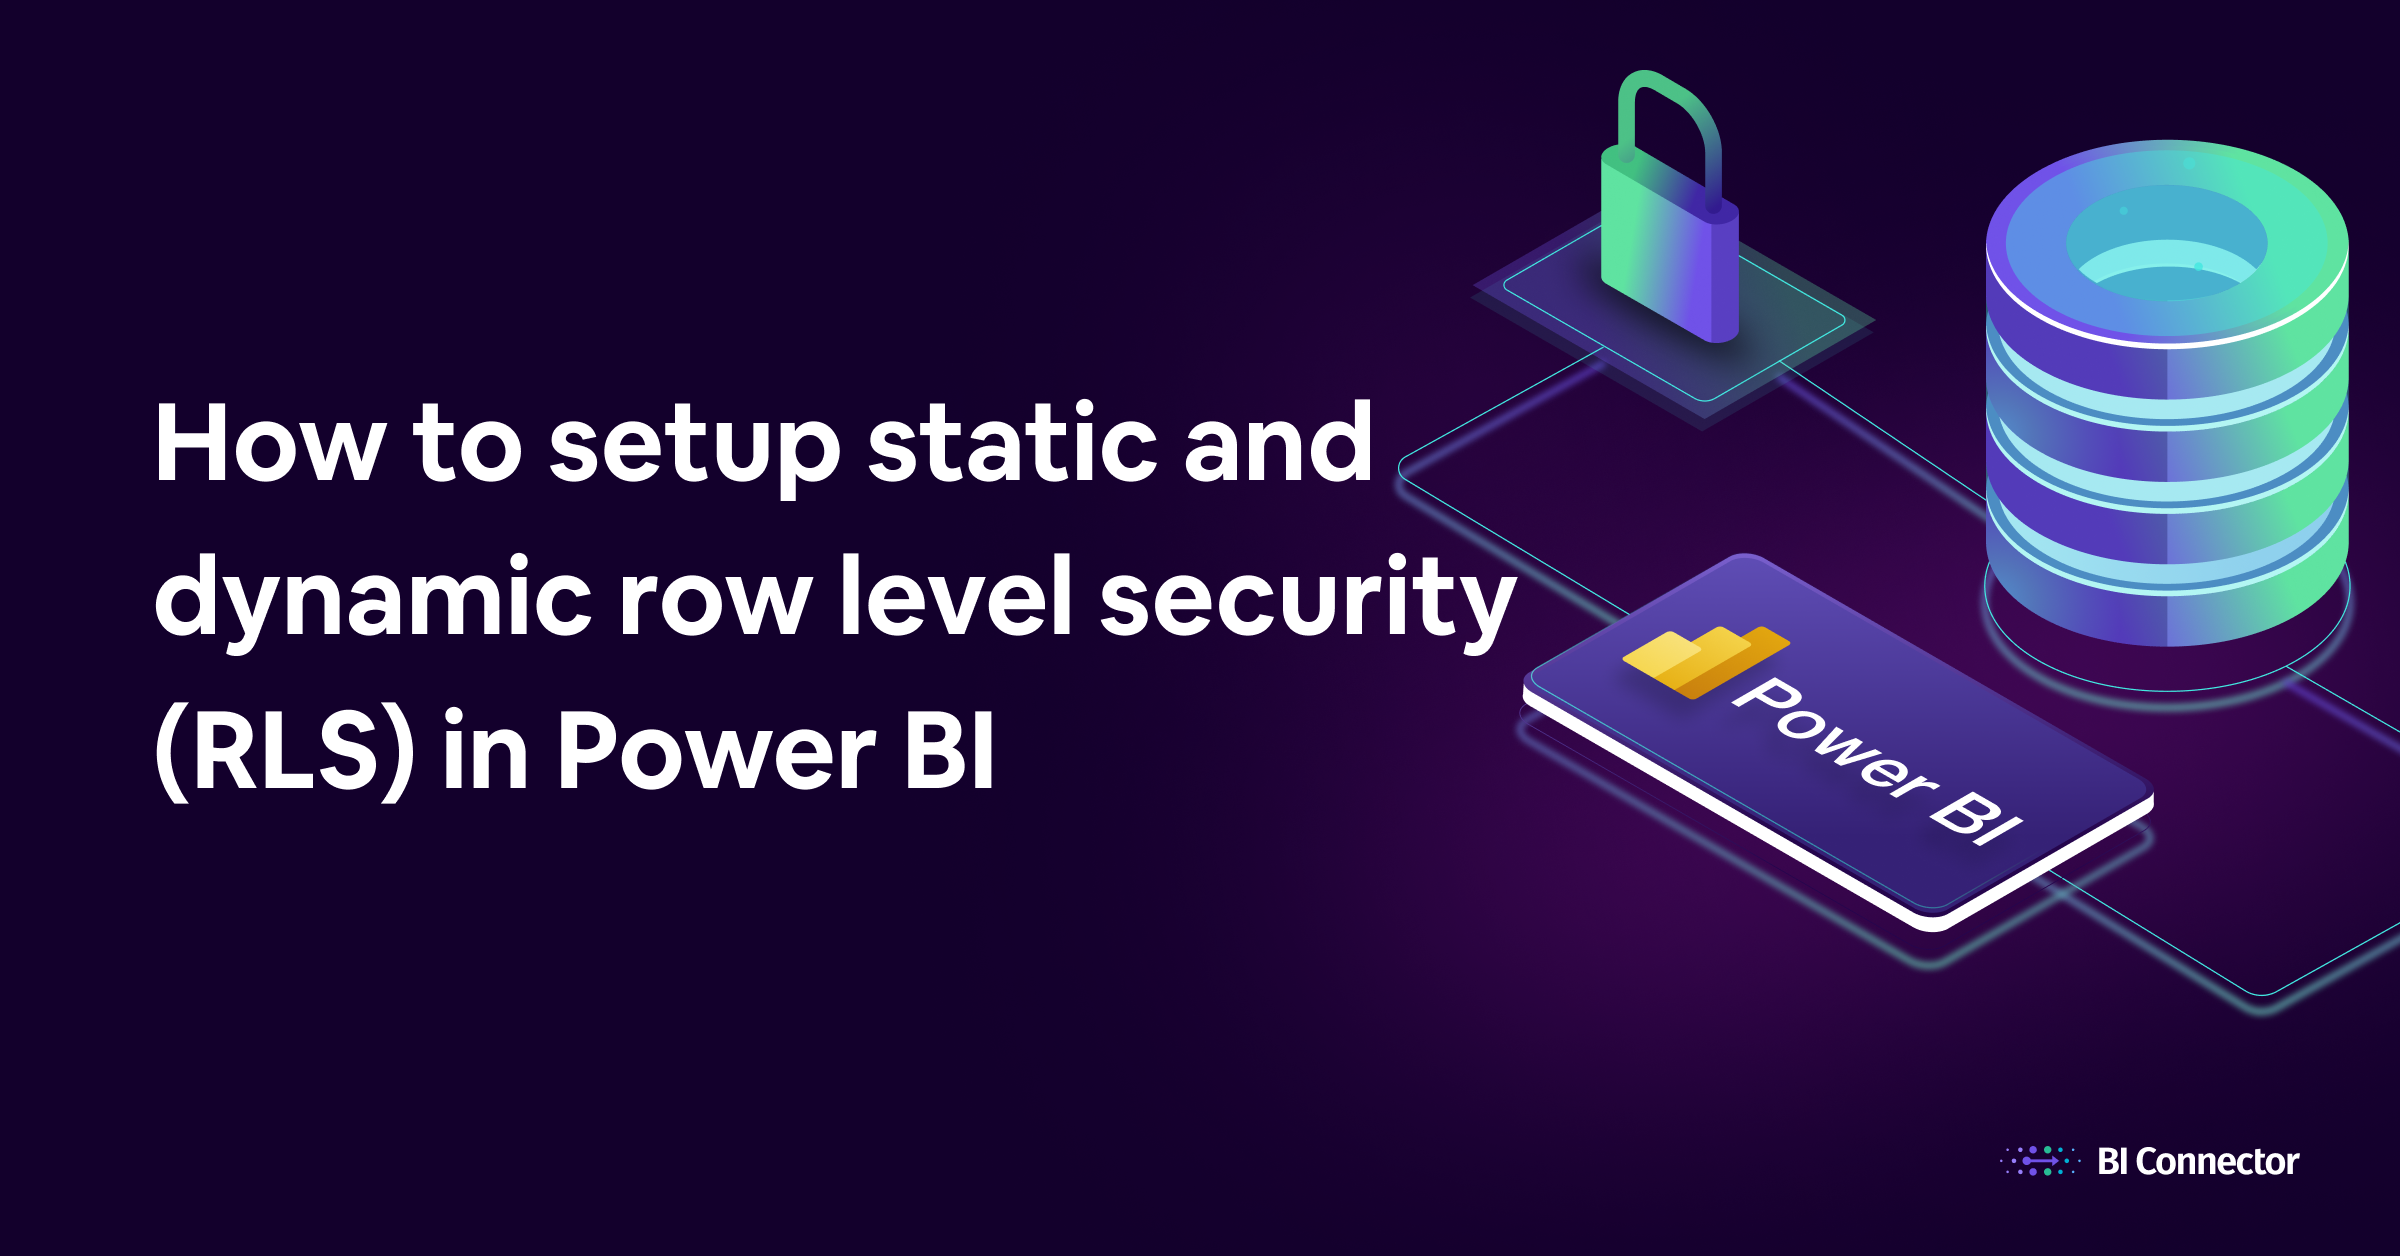 How to setup static and dynamic row level security in Power BI